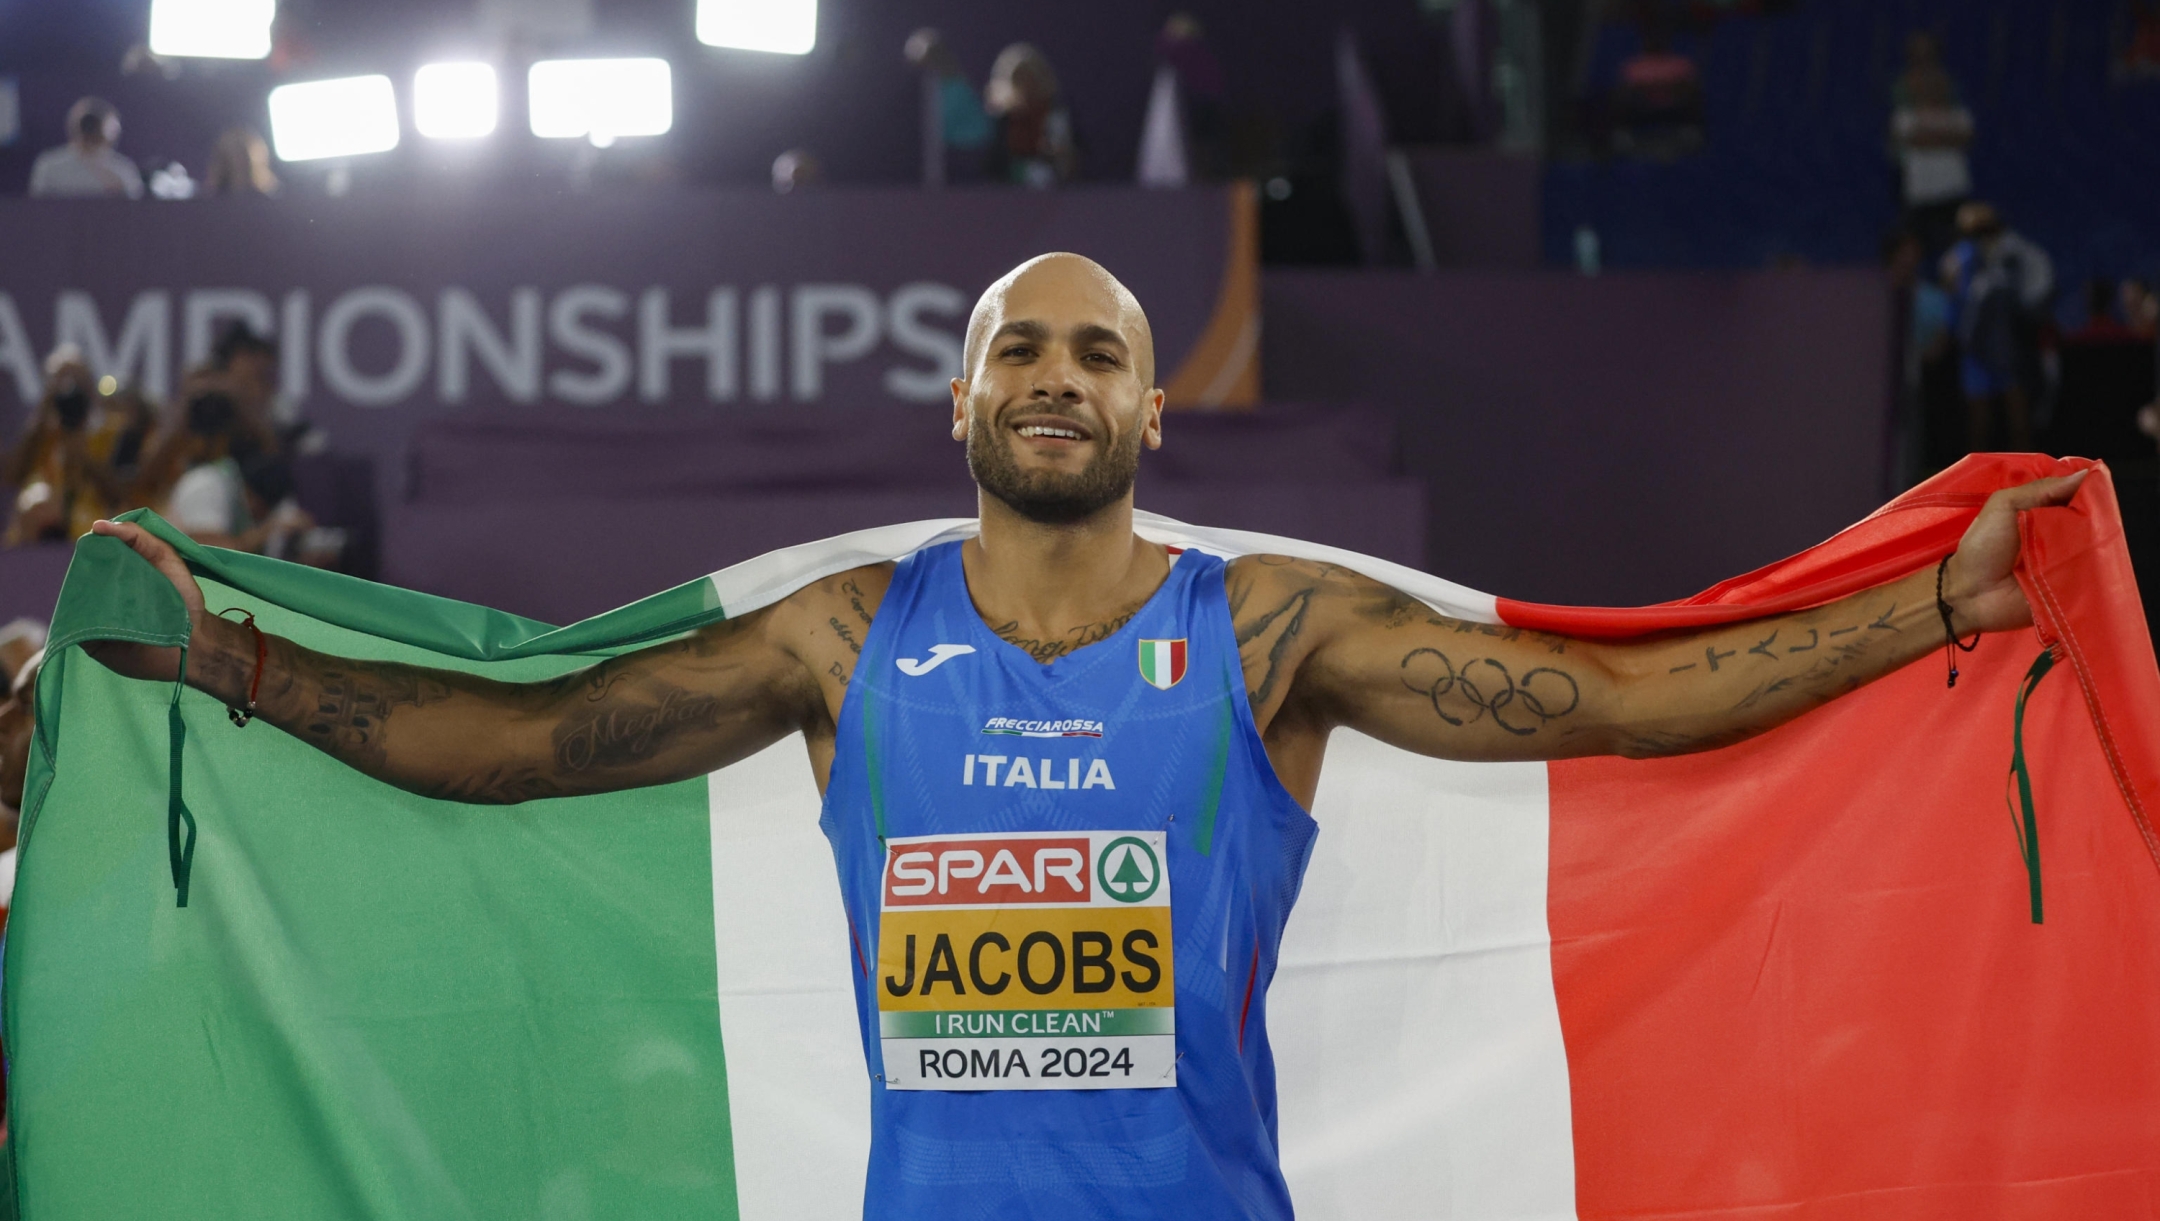 Gold medalist Marcell Jacobs of Italy celebrates after the 100m Men Final during the European Athletics Championship at Olimpico Stadium in Rome, Italy, 08 June 2024. ANSA/FABIO FRUSTACI